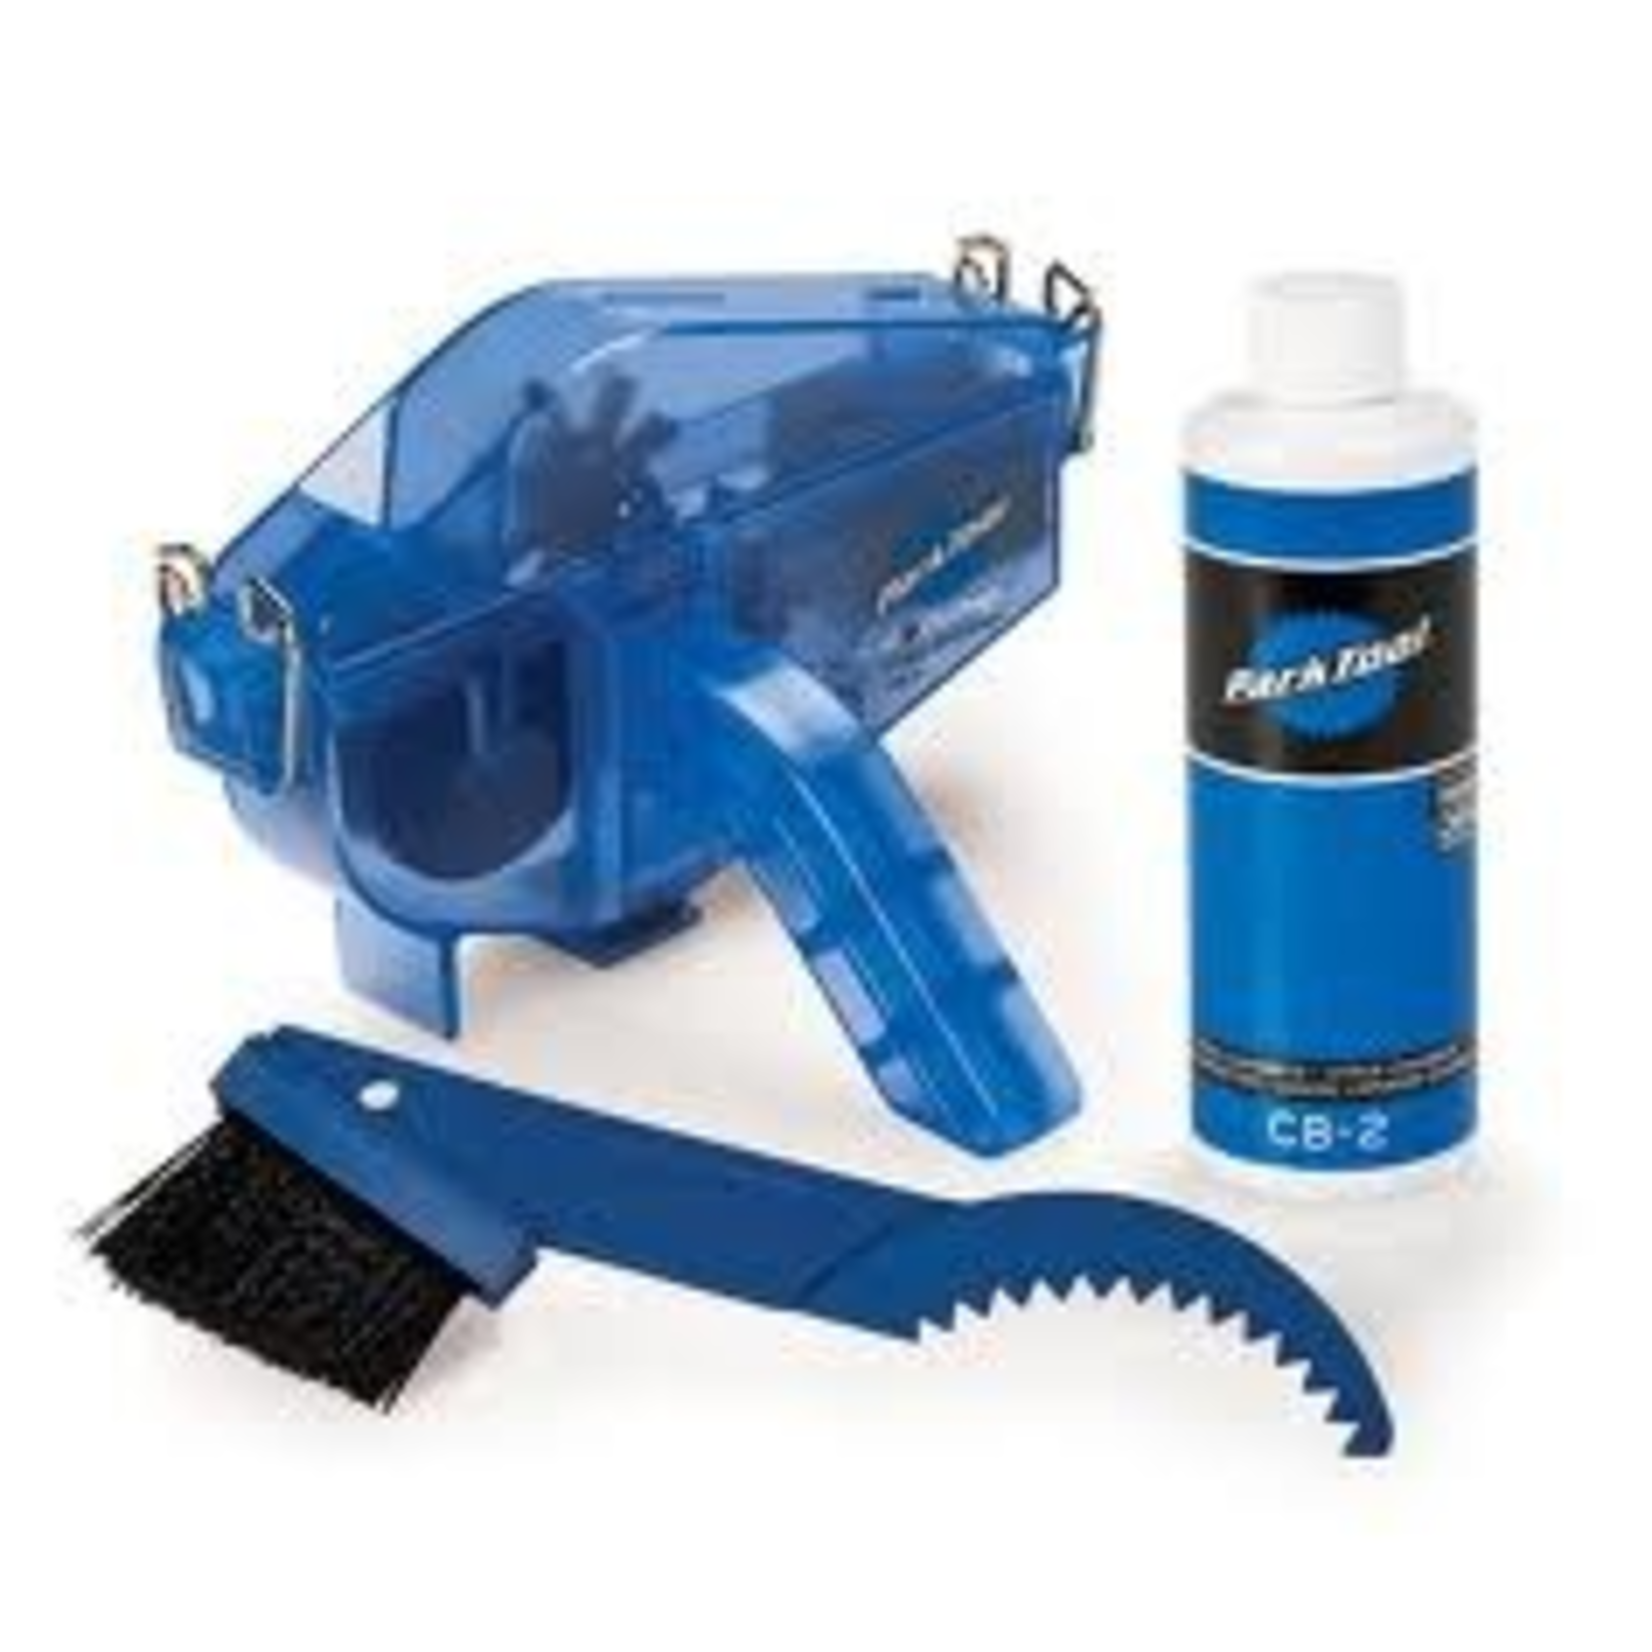 Park Tool Parktool Cg-2 Chain Gang Cleaning System